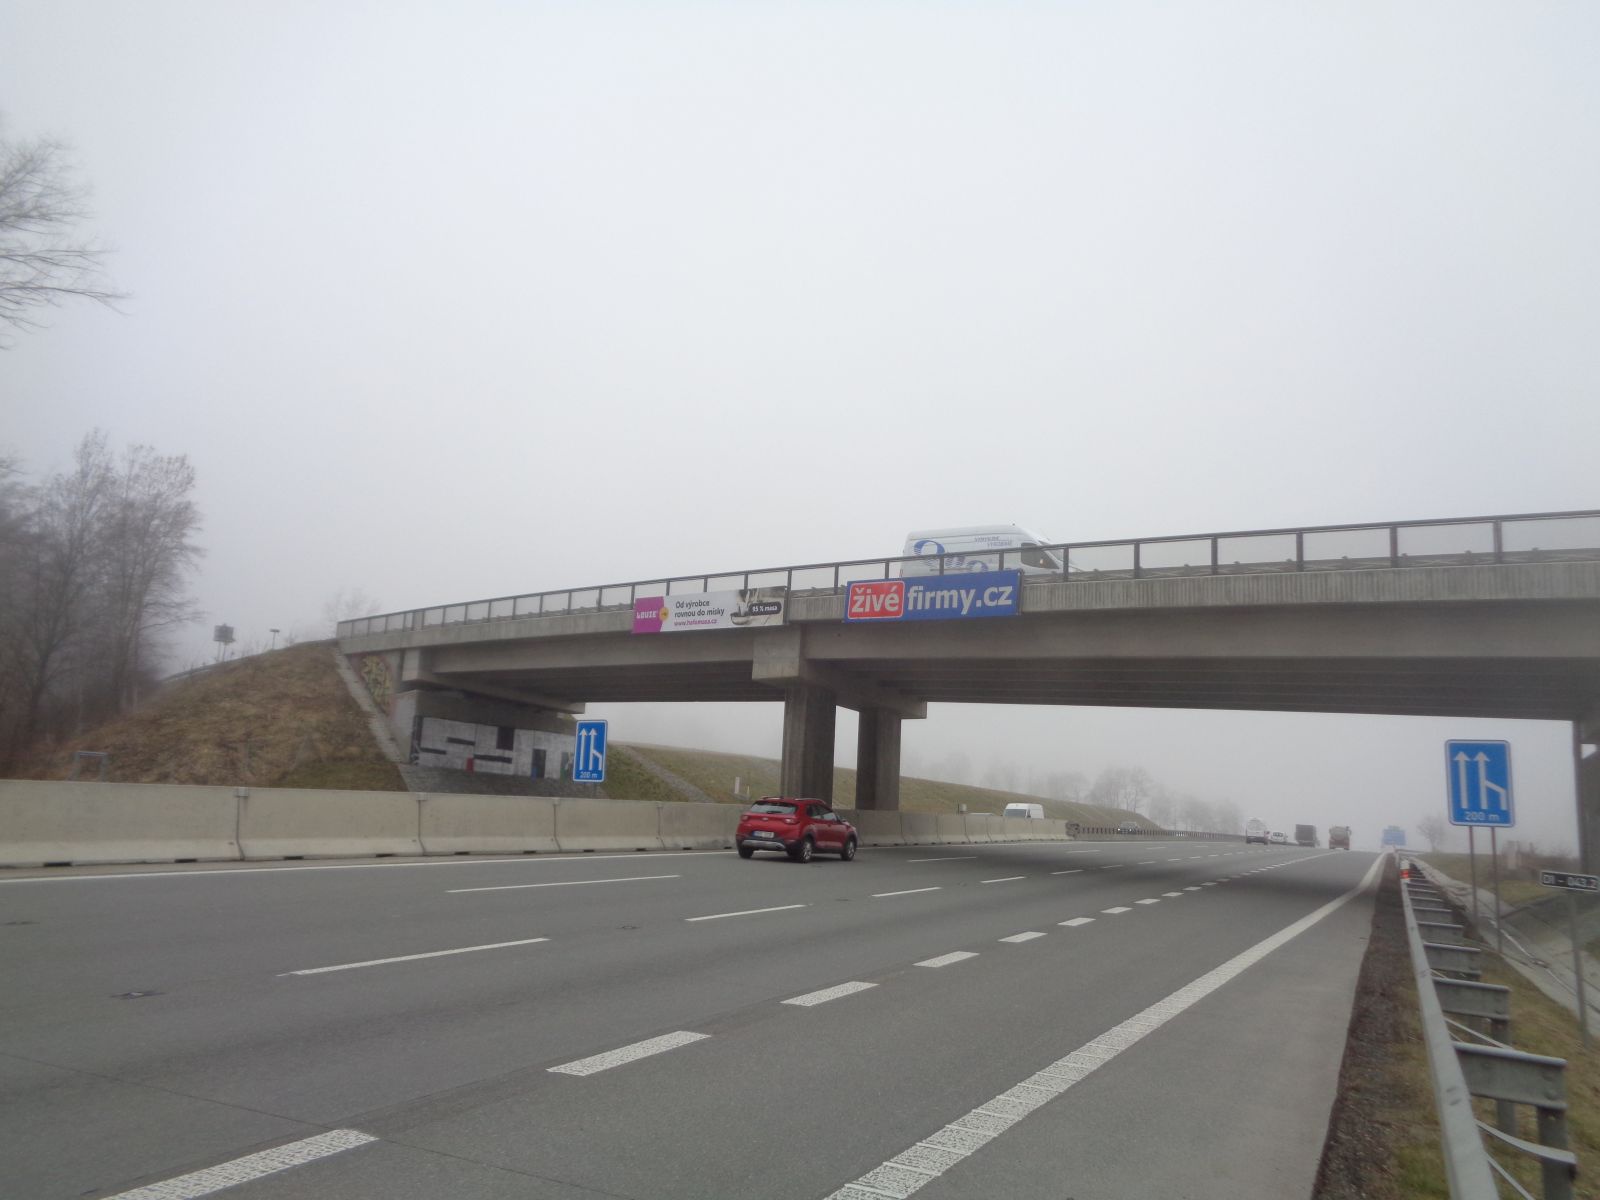 The D1 motorway is already decorated with ads for LOUIE!